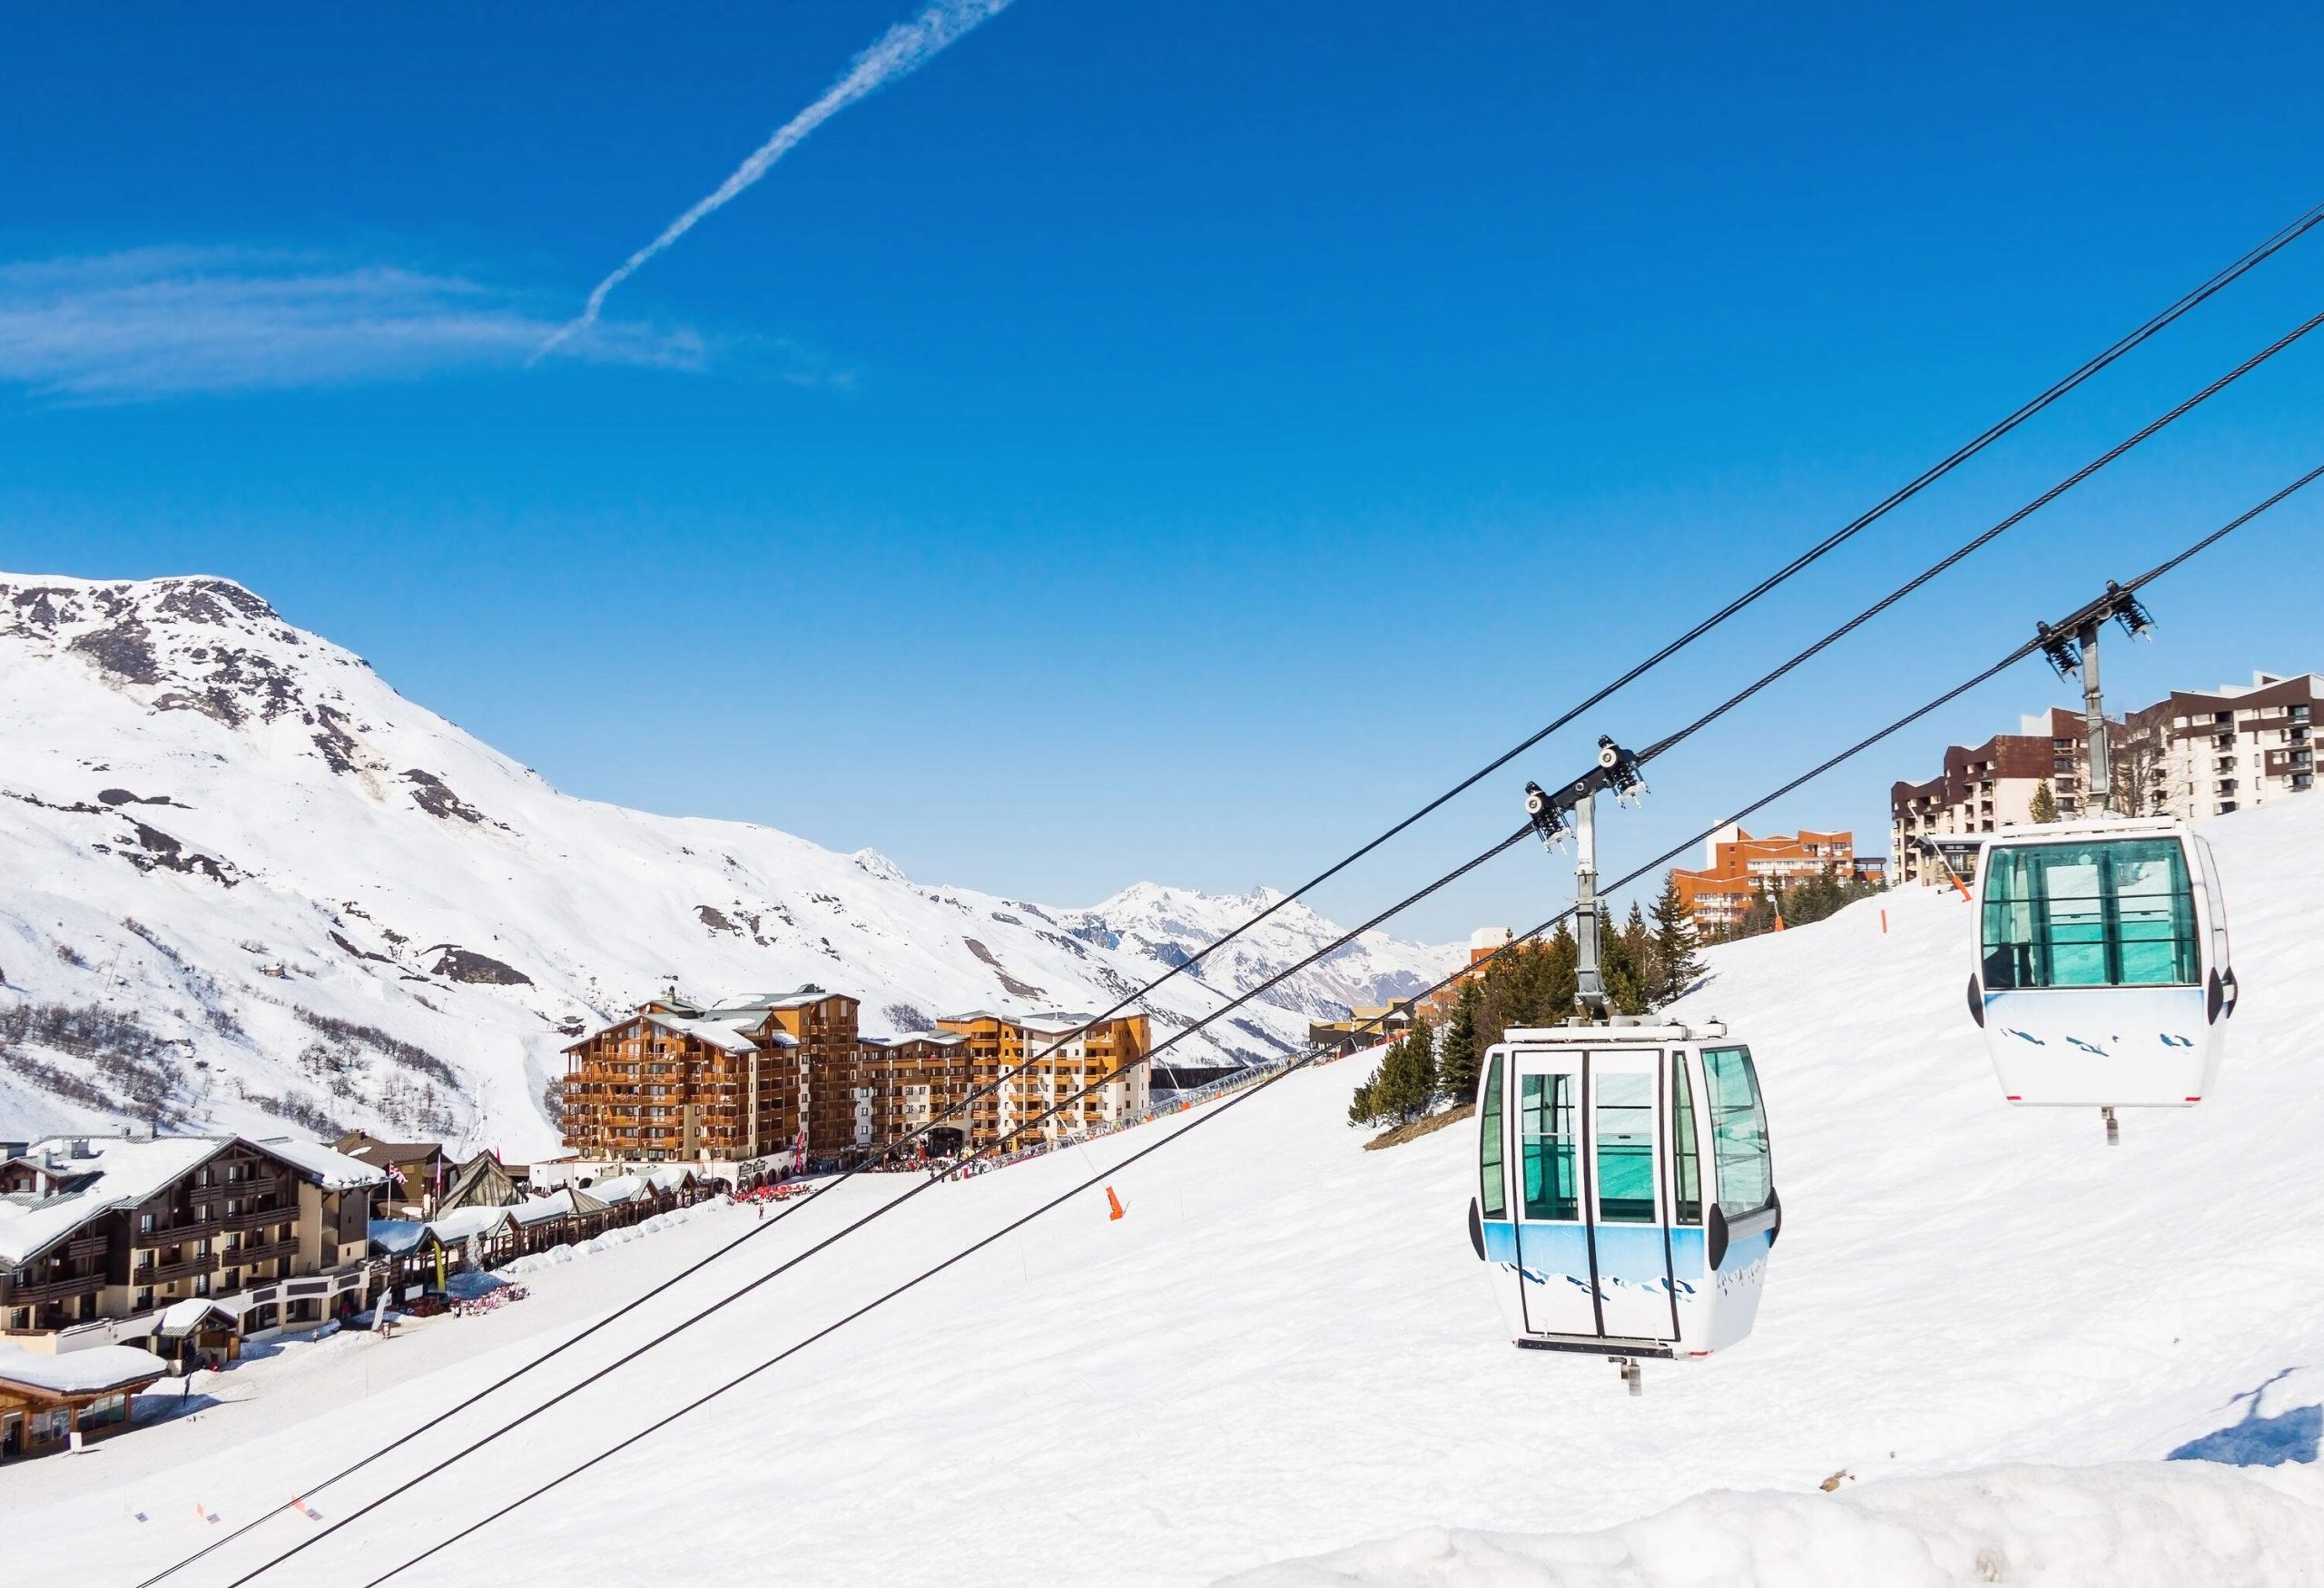 Two cable cars suspended above a snow hill with views of a ski village at the base of a mountain.